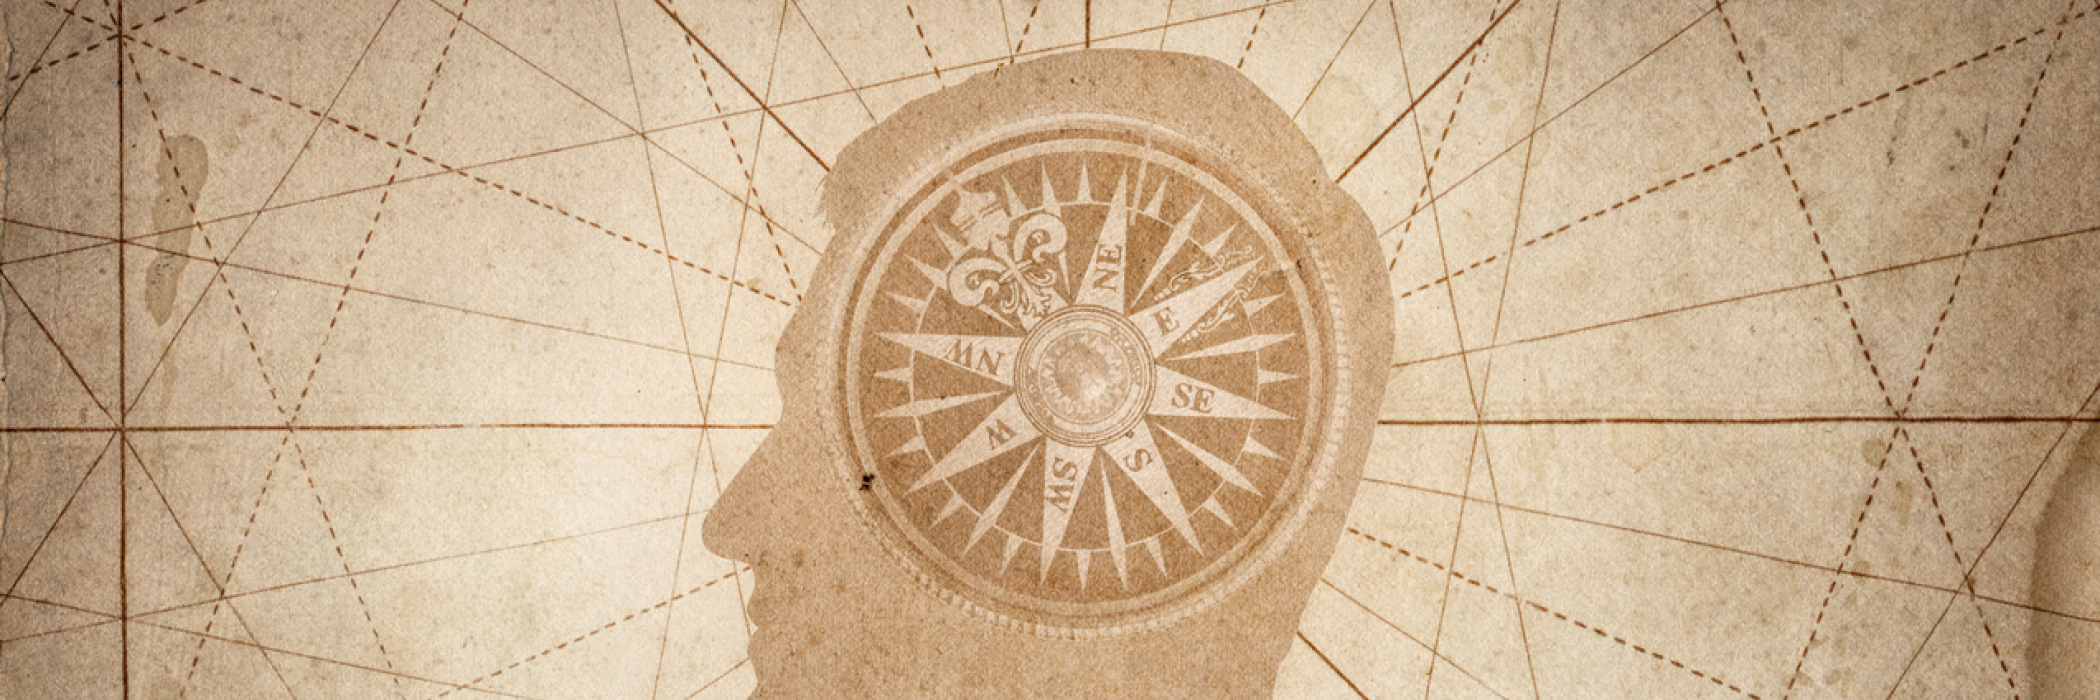 Better perception: A human head with compass